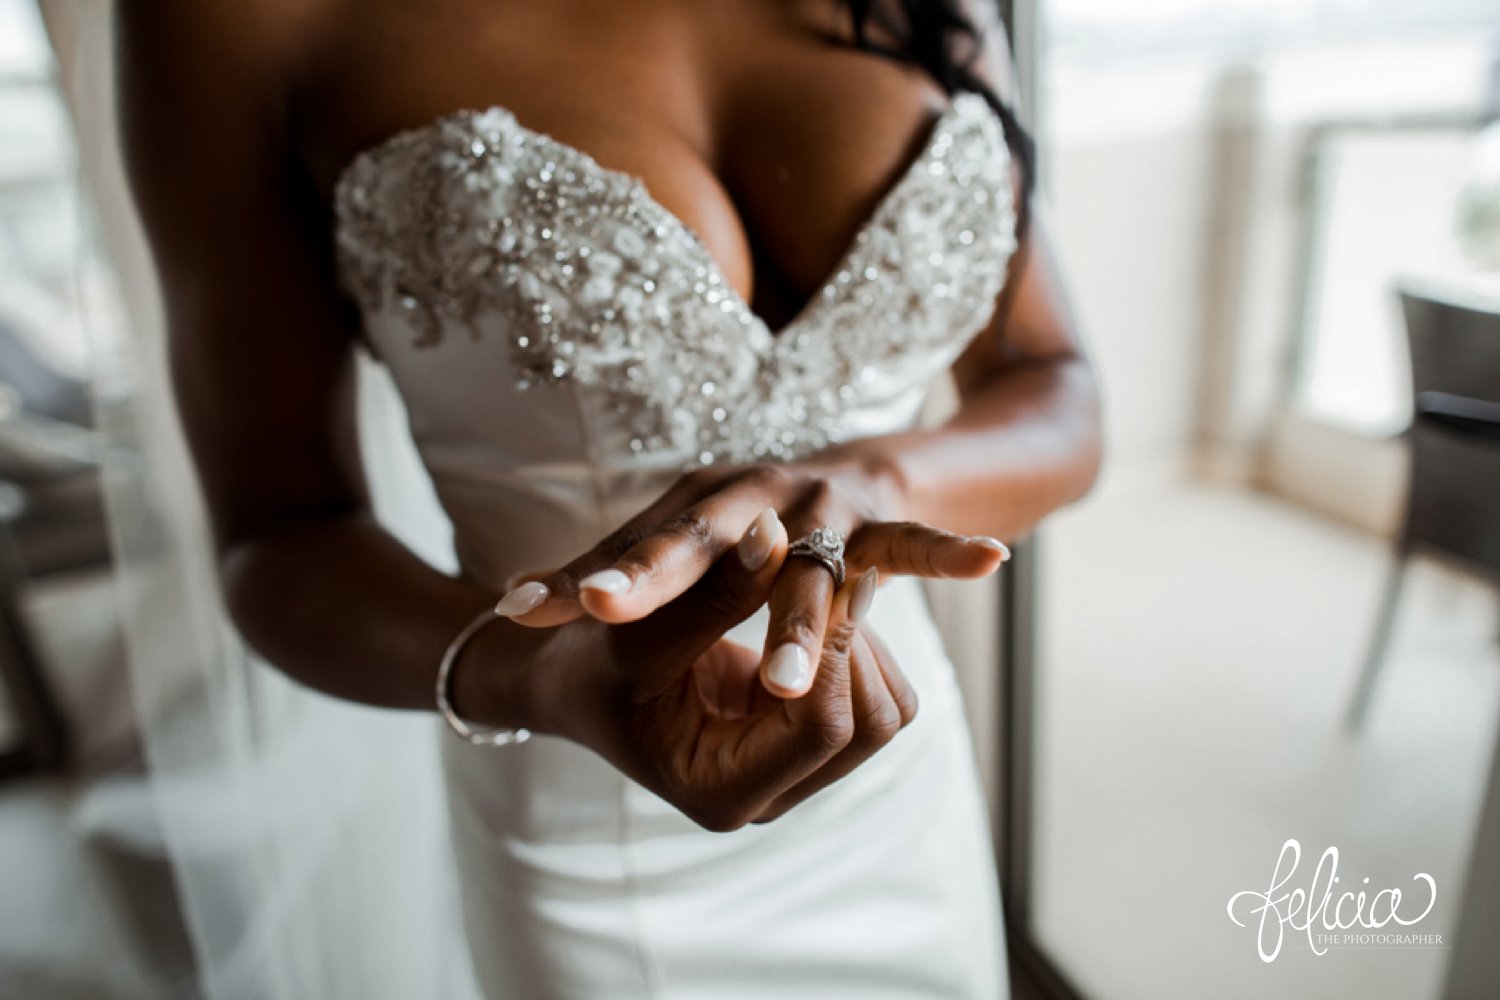   images by feliciathephotographer.com | destination wedding photographer | st lucia | l&s travel | the Royalton | getting ready | putting on the dress | details | beaded bodice | kleinfeld | satin | diamond engagement ring | nude nails | strapless | 